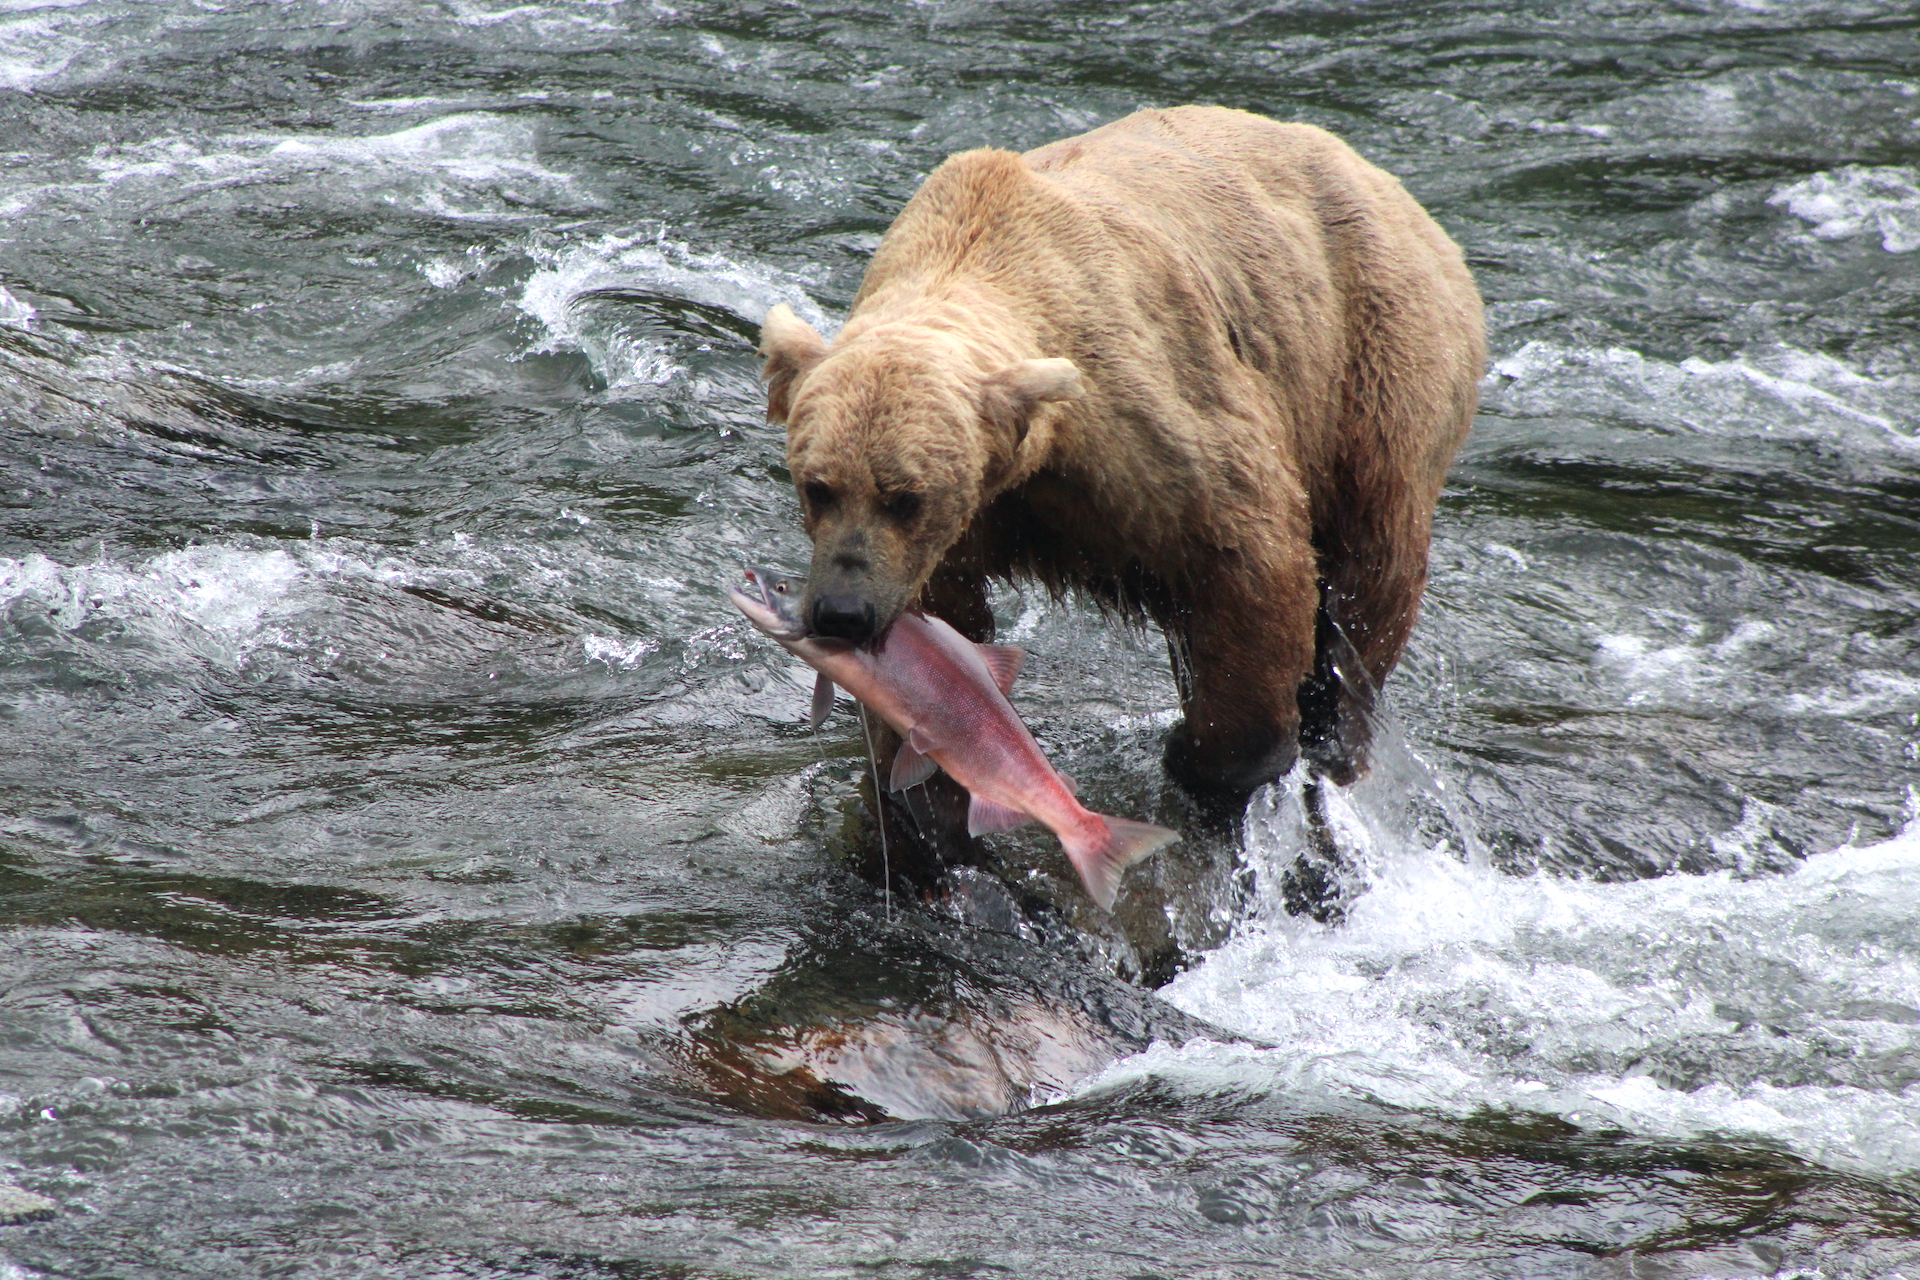 Brown bear standing in river. Water is flowing over boulders forming riffles. Bear is moving in direction of camera. Water drips off her fur. She holds a sockeye salmon in her mouth.